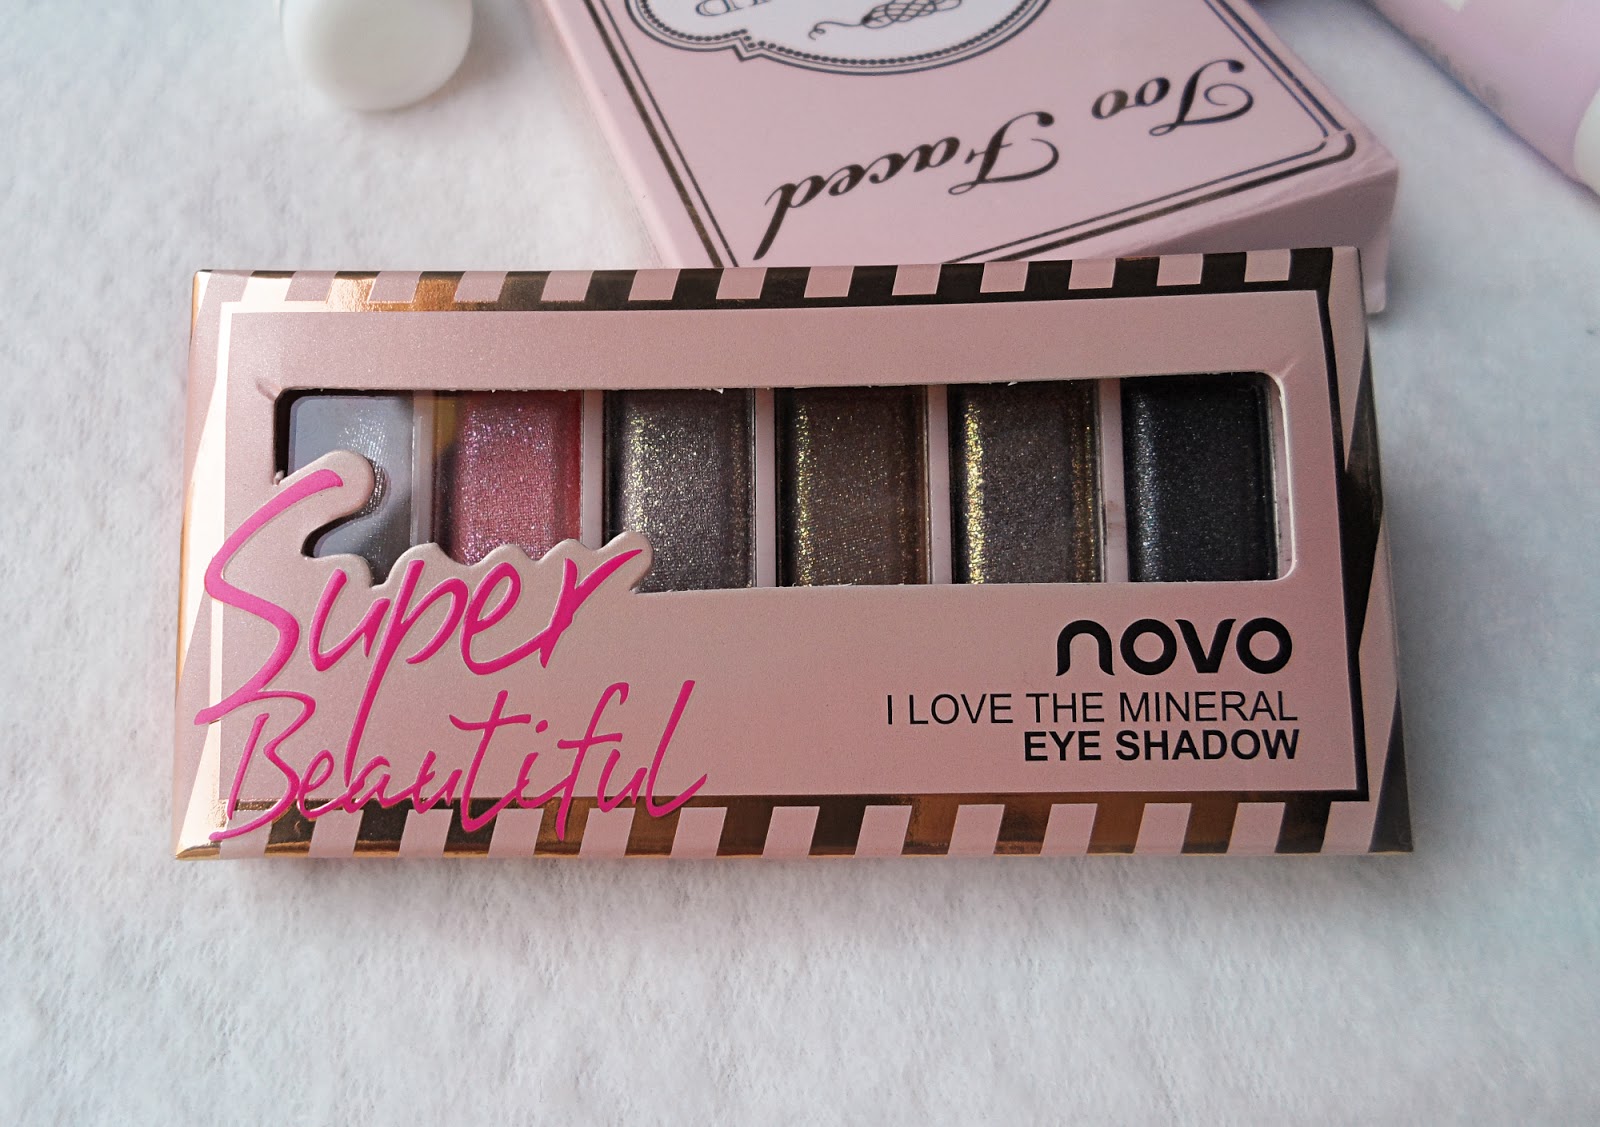 shimmer eyeshadow palette born pretty store review swatches pictures